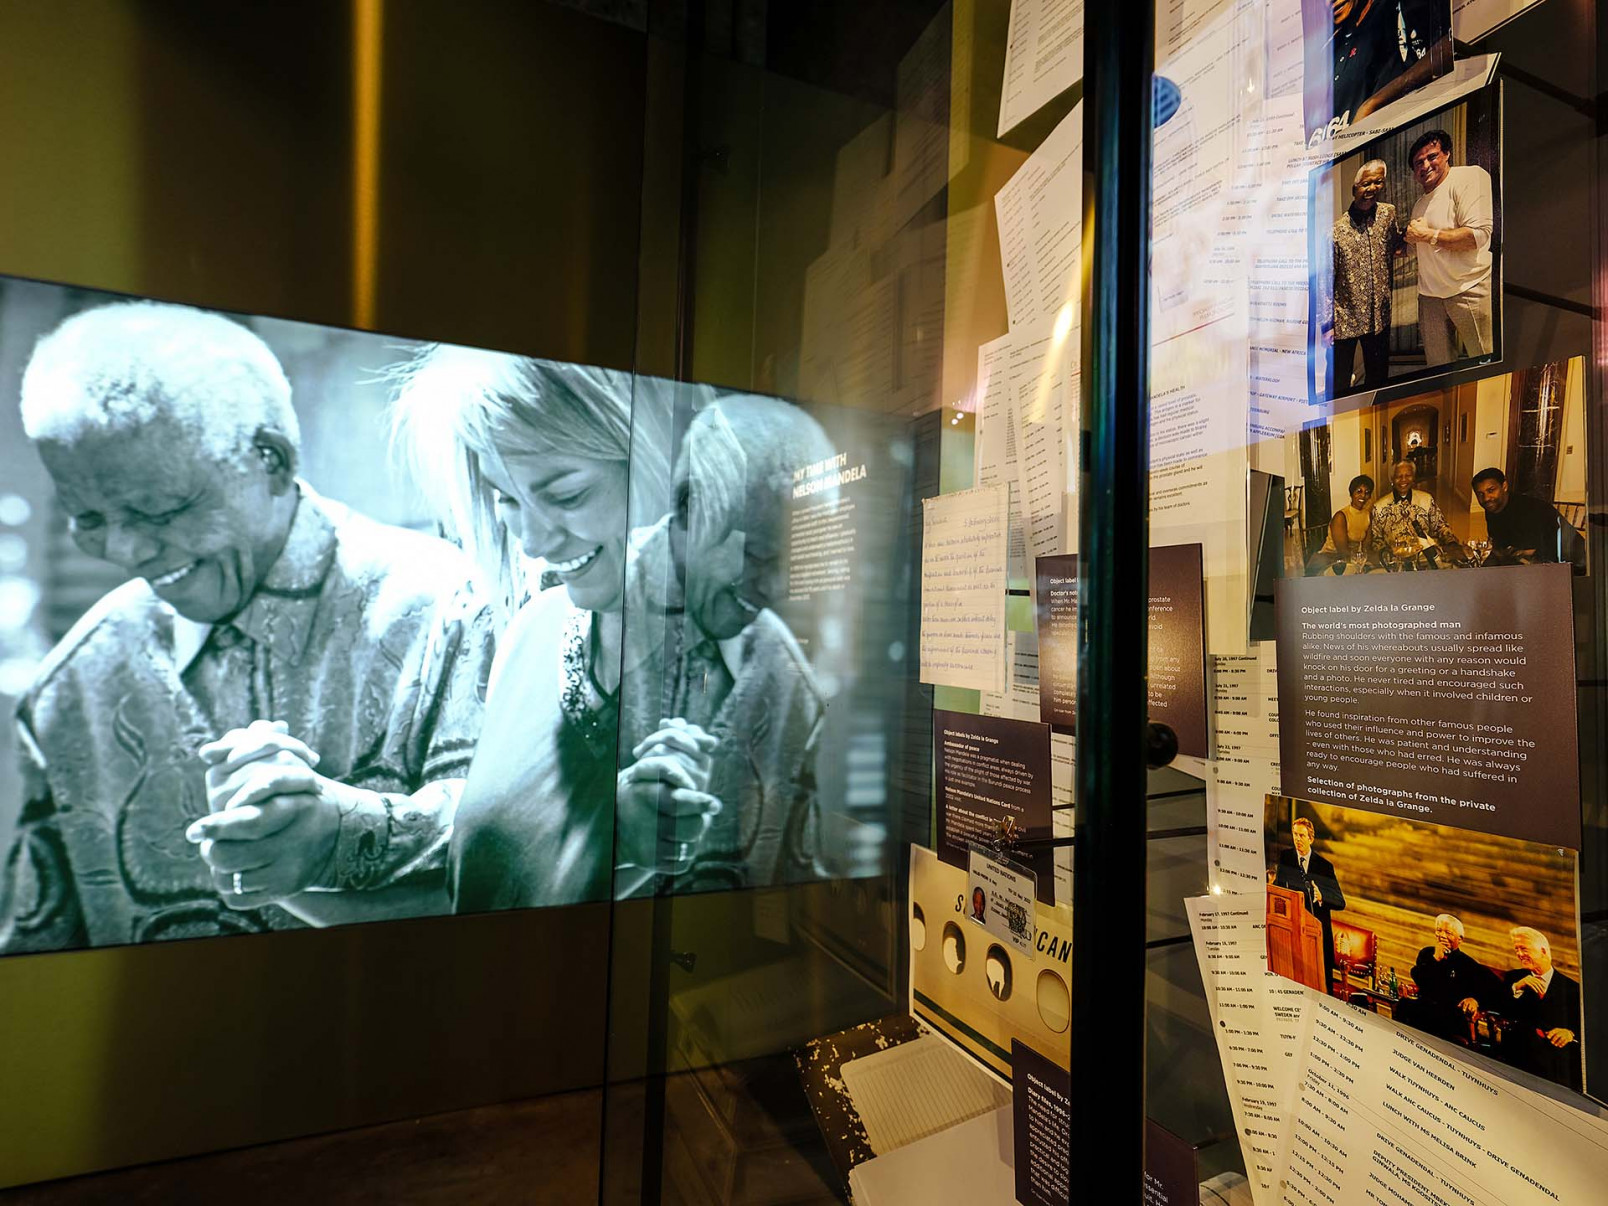 Nelson Mandela Exhibition: Digital Display Backed by Written Exhibition Content